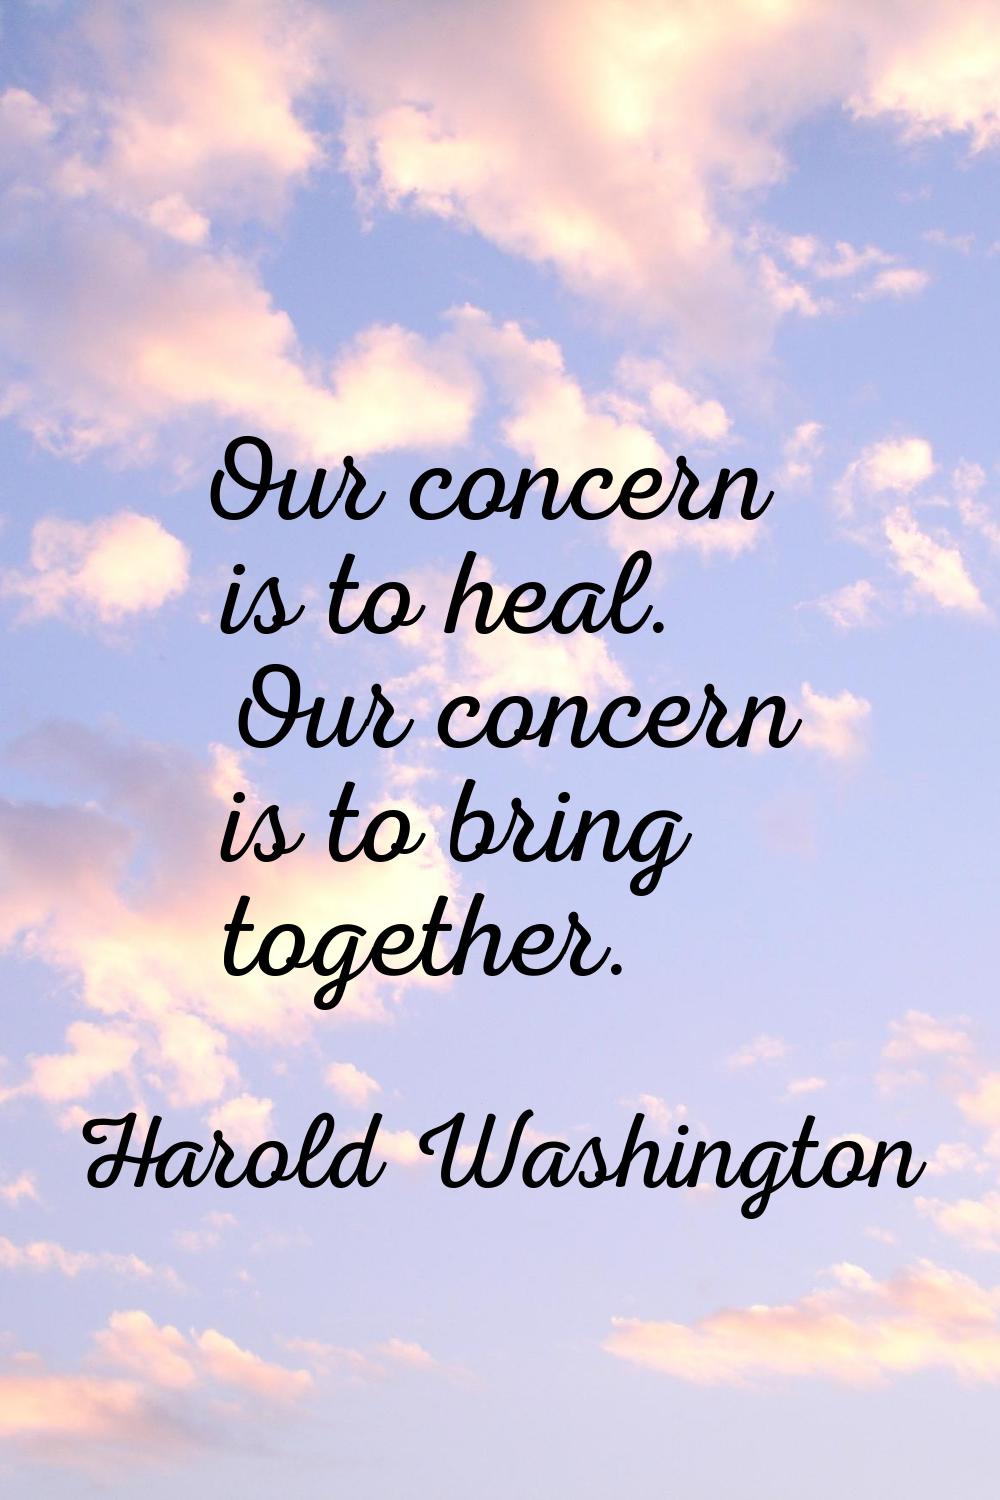 Our concern is to heal. Our concern is to bring together.